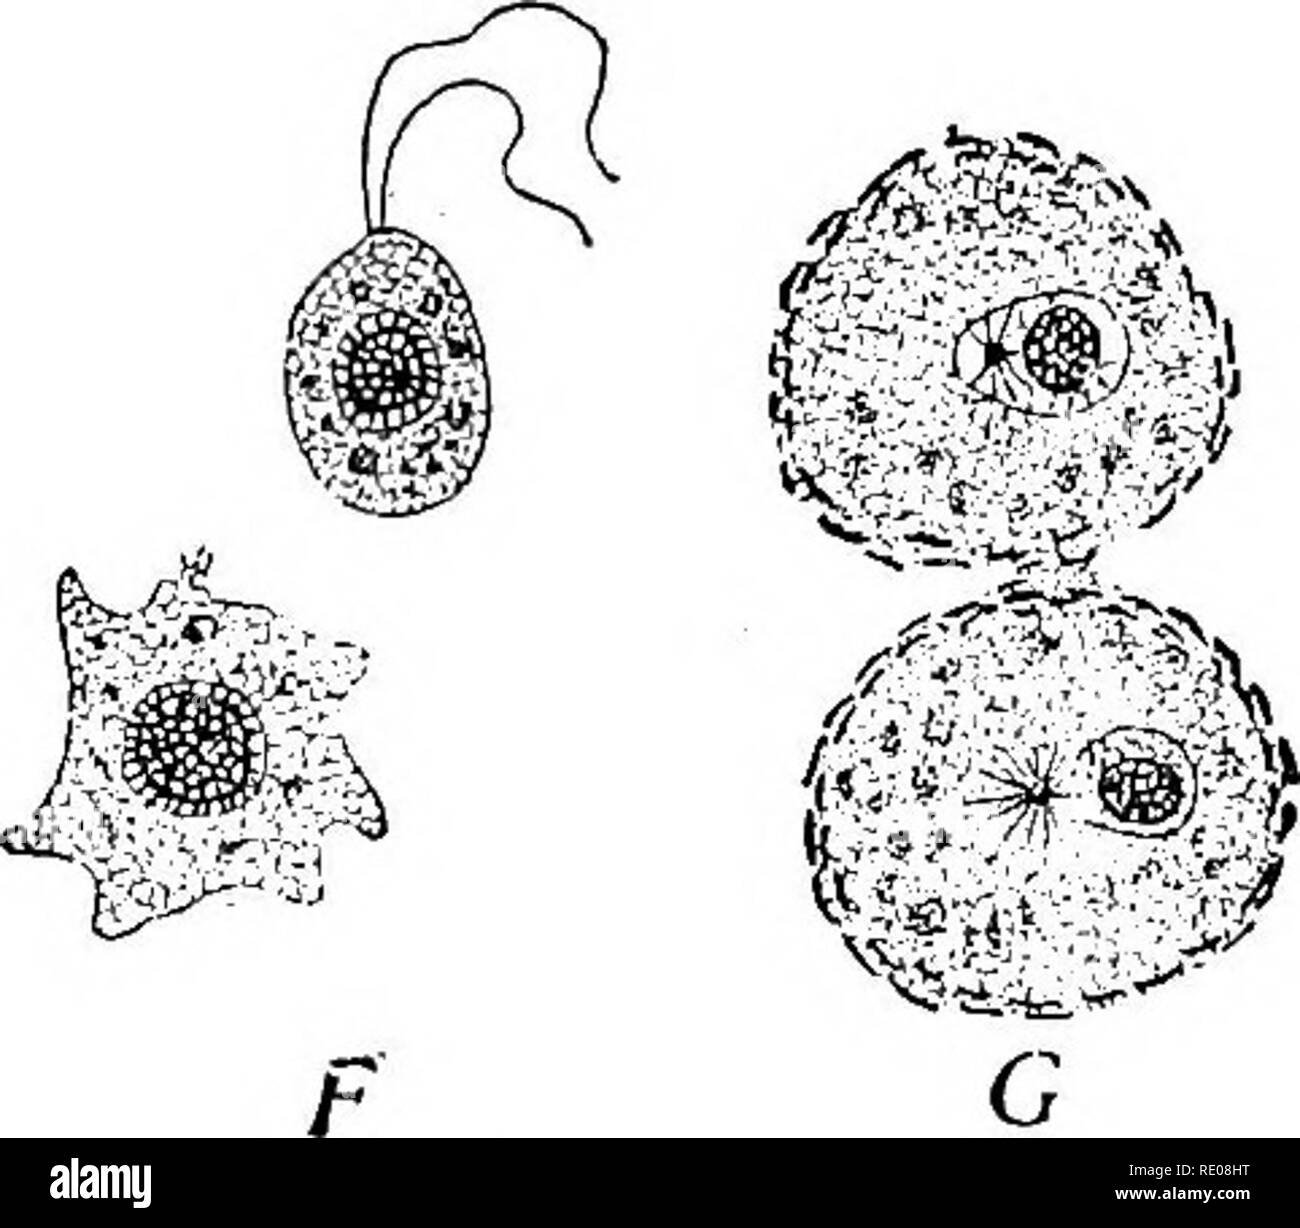 . The Protozoa. Protozoa. D Fig. 144. — Nuclear division and spore-formatron in Heliozoa. [SCHAUDINN.] A. A vegetative cell of SpficBrastruni with the axial filaments focussed in a central-granule (division-centre). B-D. Division of the nucleus in Acanthocystis. E, F, Flagellated and amoe- boid swarm-spores formed by budding. G. Exit of the division-centre from the nucleus. Like Paramceba this heliozoon reproduces by swarm-spores; the division-centre, however, takes no part in their formation, but remains intact while the nucleus divides without mitosis. The buds, therefore, contain no portion Stock Photo